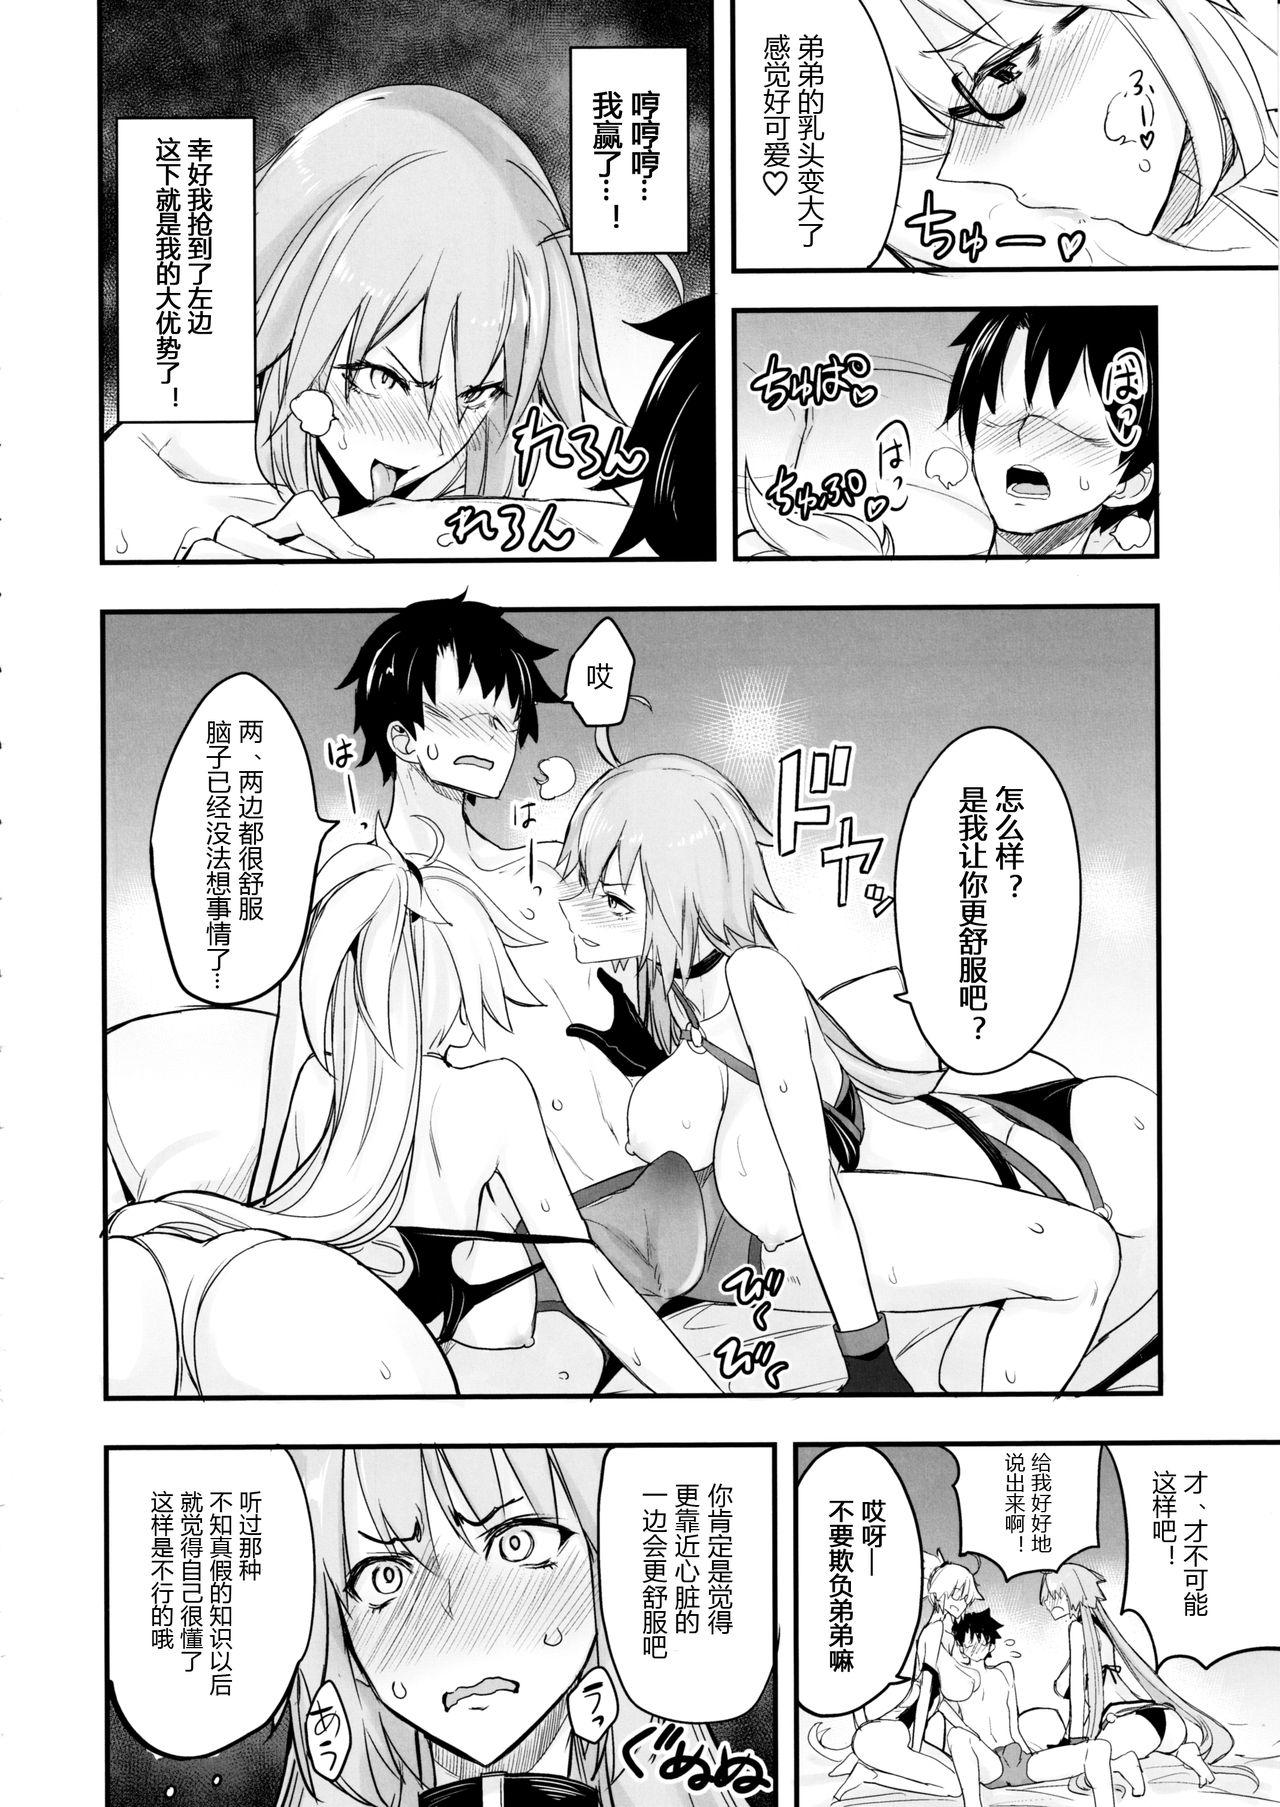 Butt Sex W Jeanne vs Master - Fate grand order Deflowered - Page 8